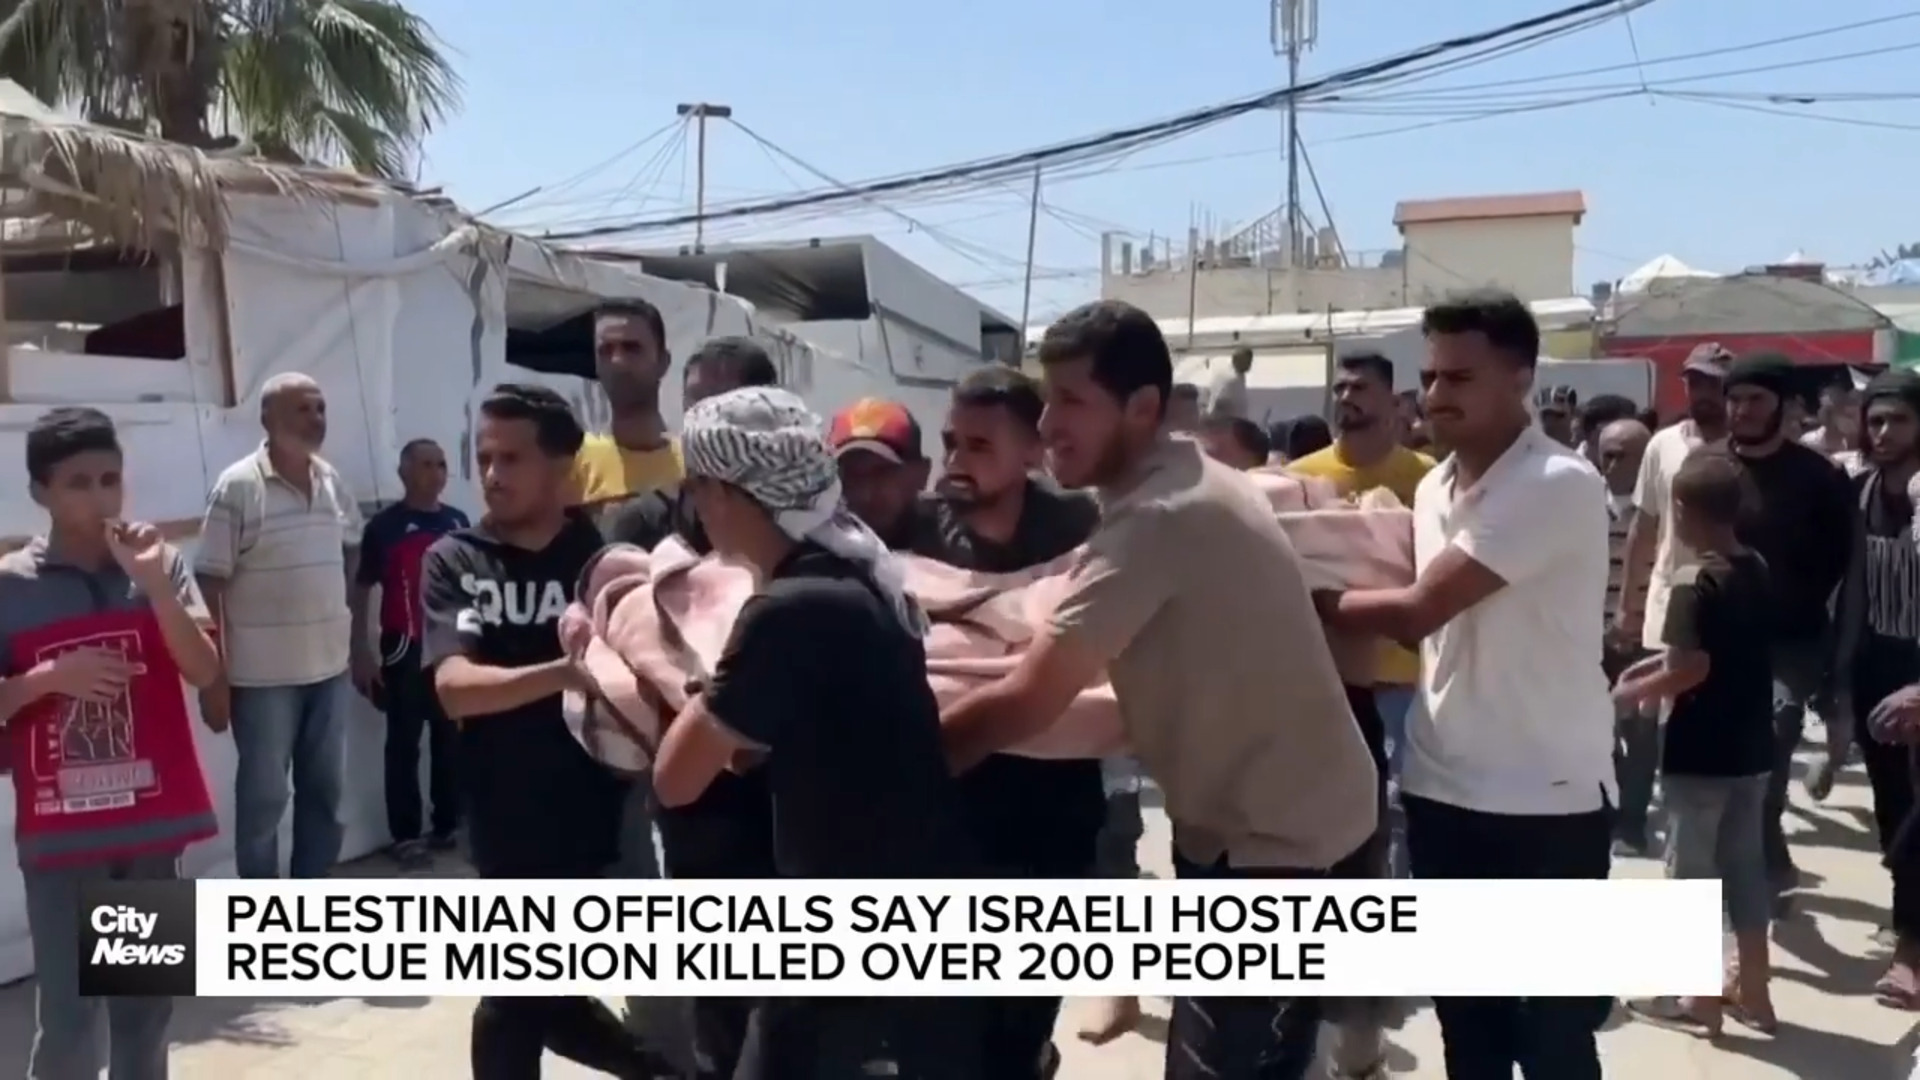 4 Israeli hostages rescued in military operation Palestinian officials say killed over 200 people